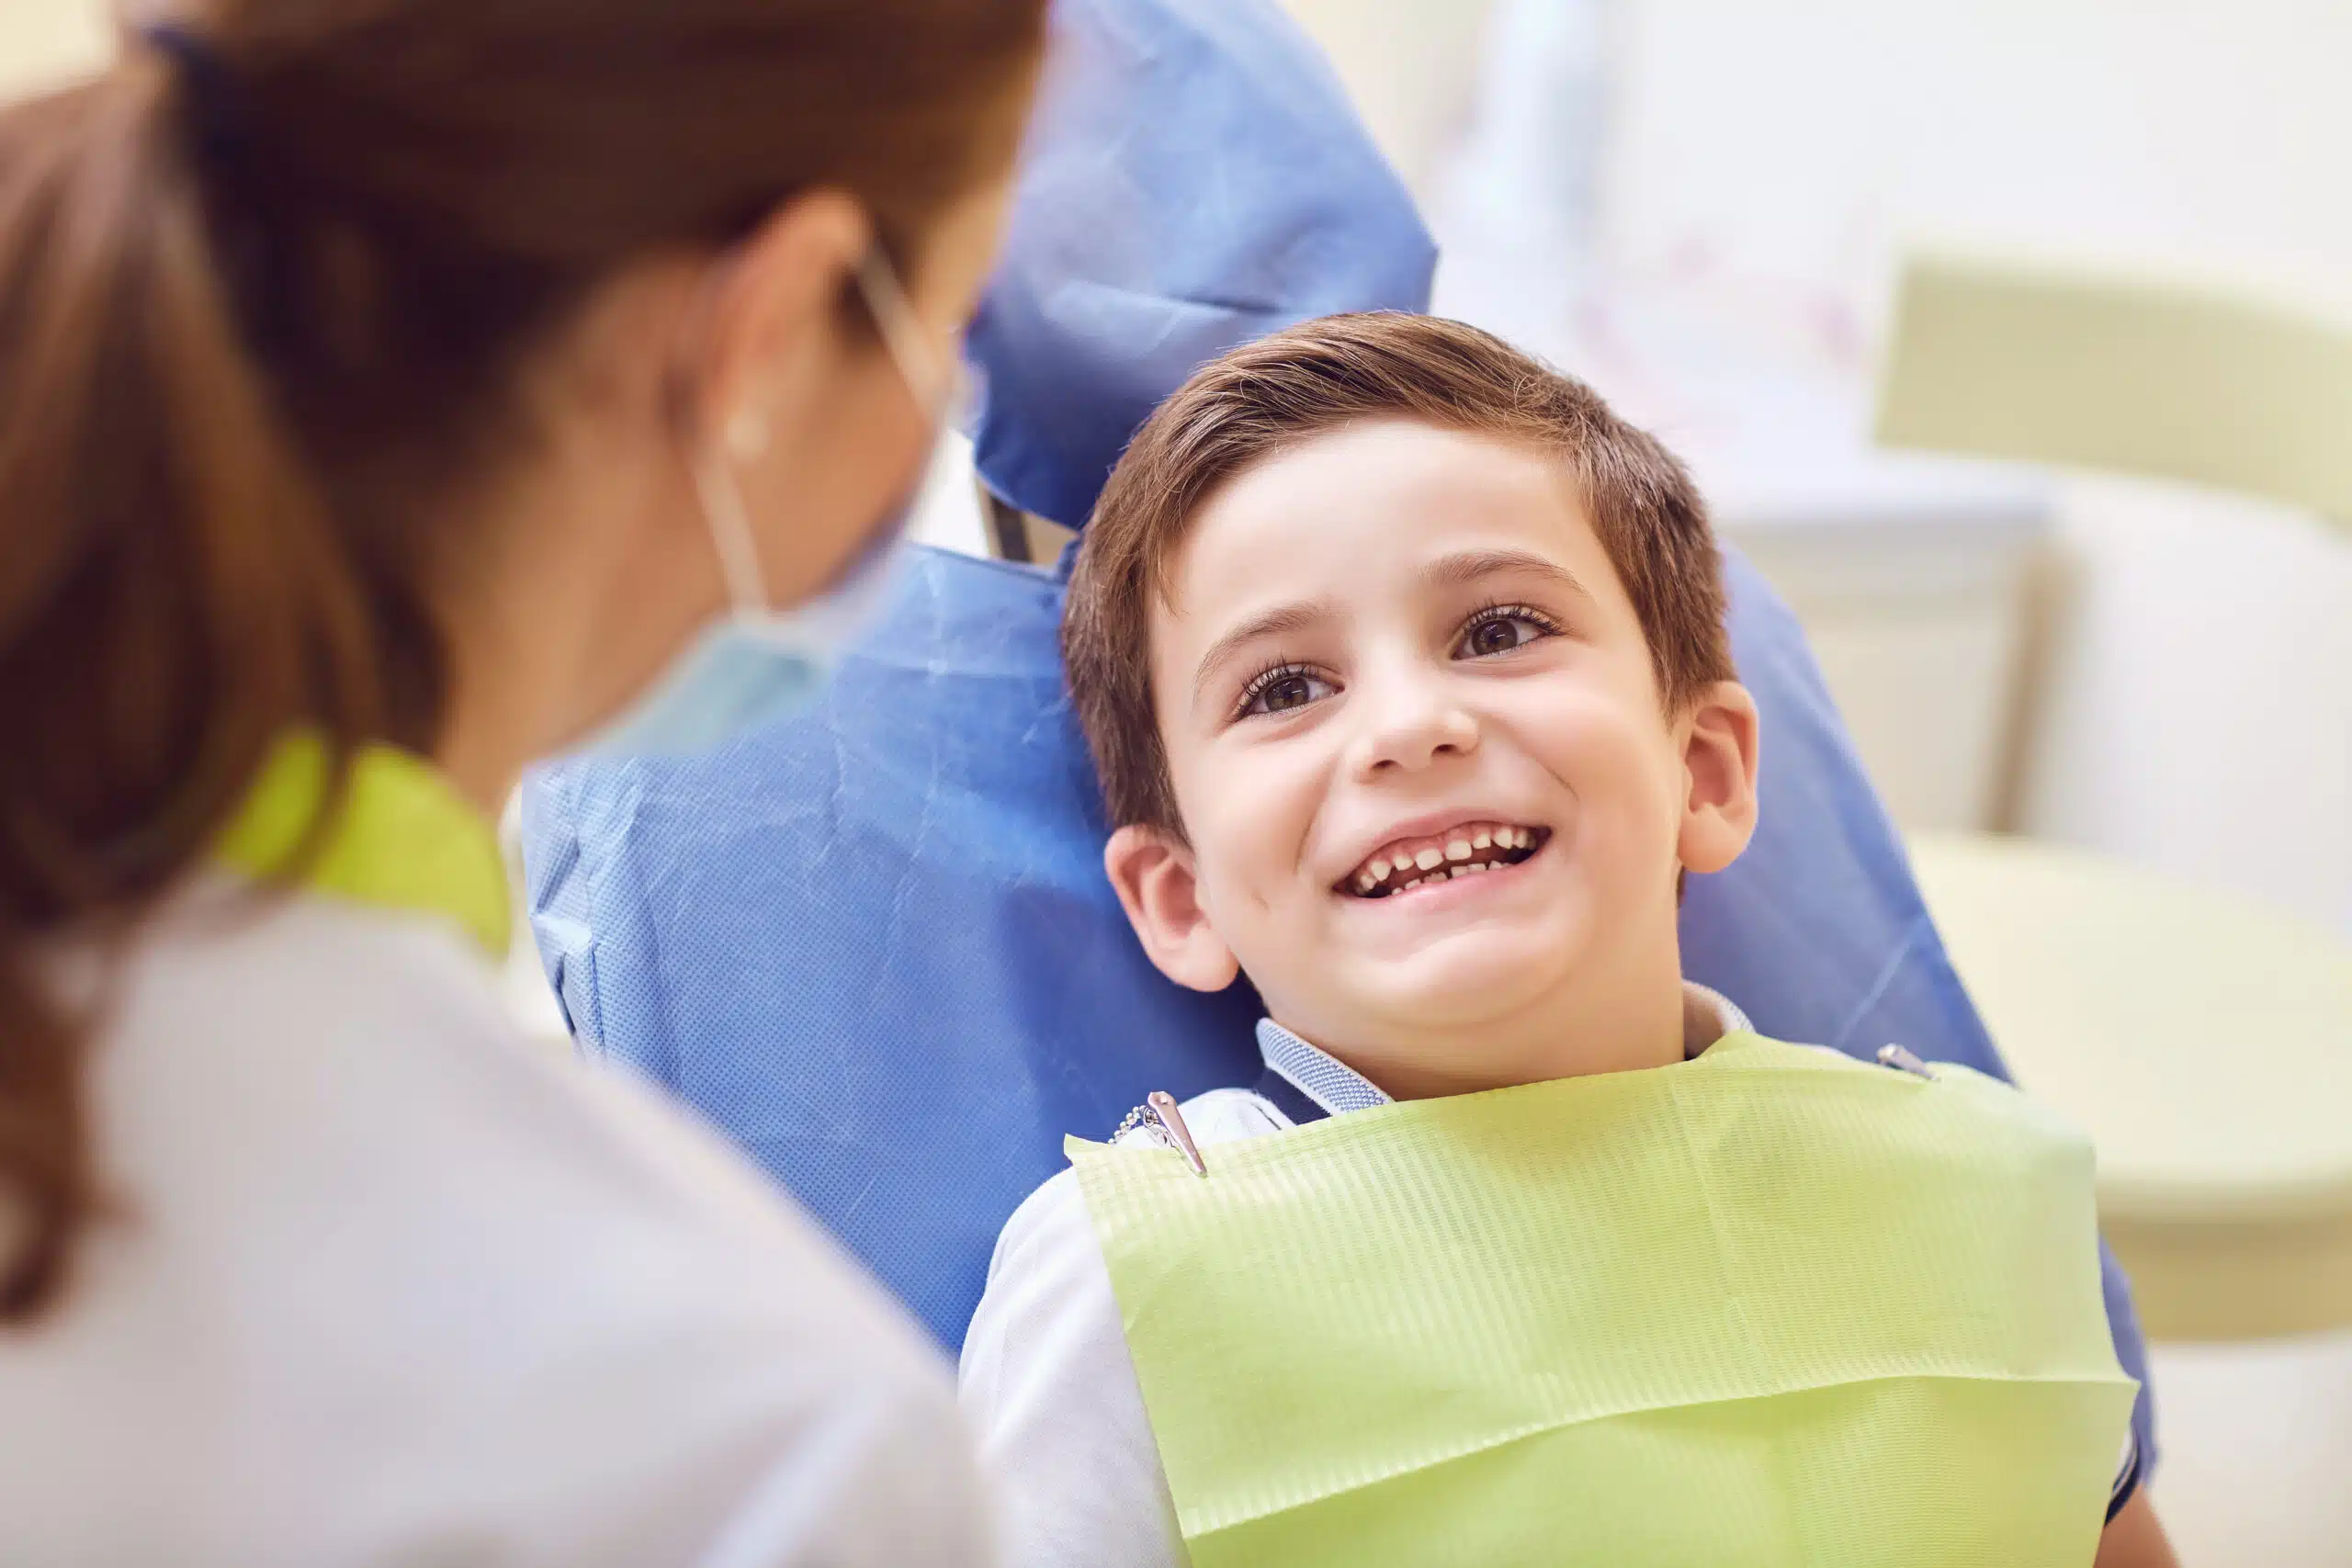 We understand that some children may experience anxiety when visiting the dentist. That's why we offer sedation dentistry options that can help your child relax during their visit.